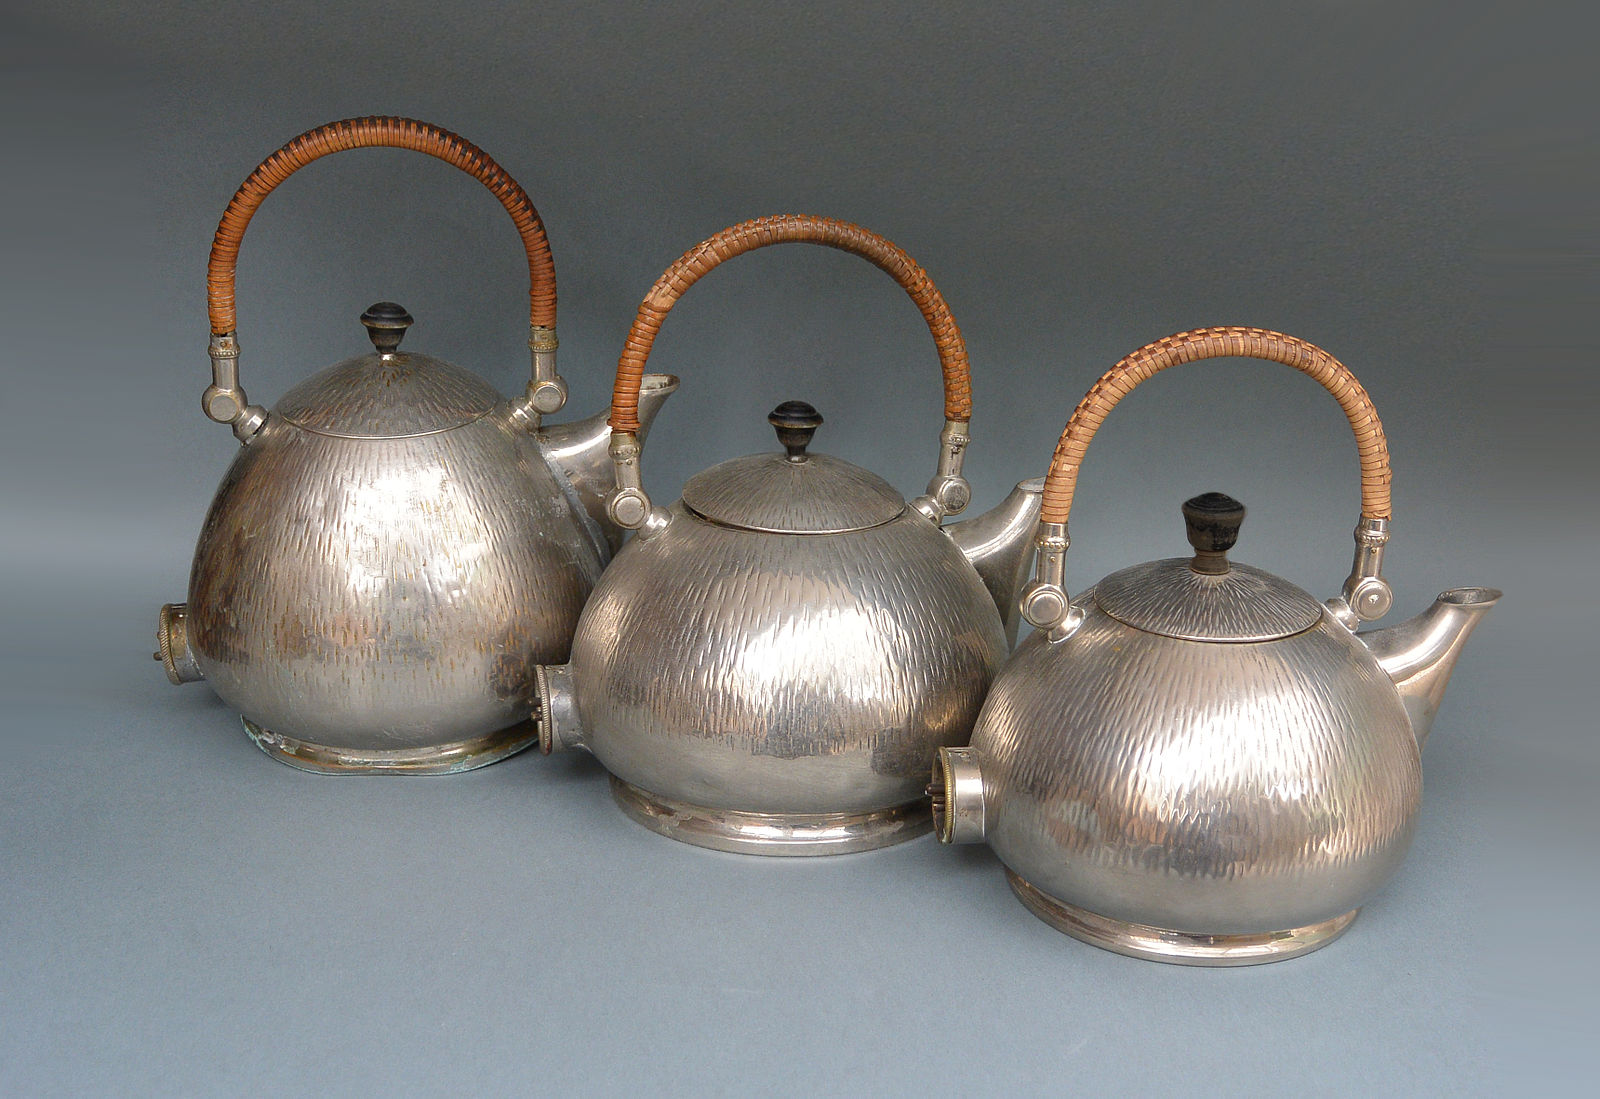 Three silver teapots with woven reed handles